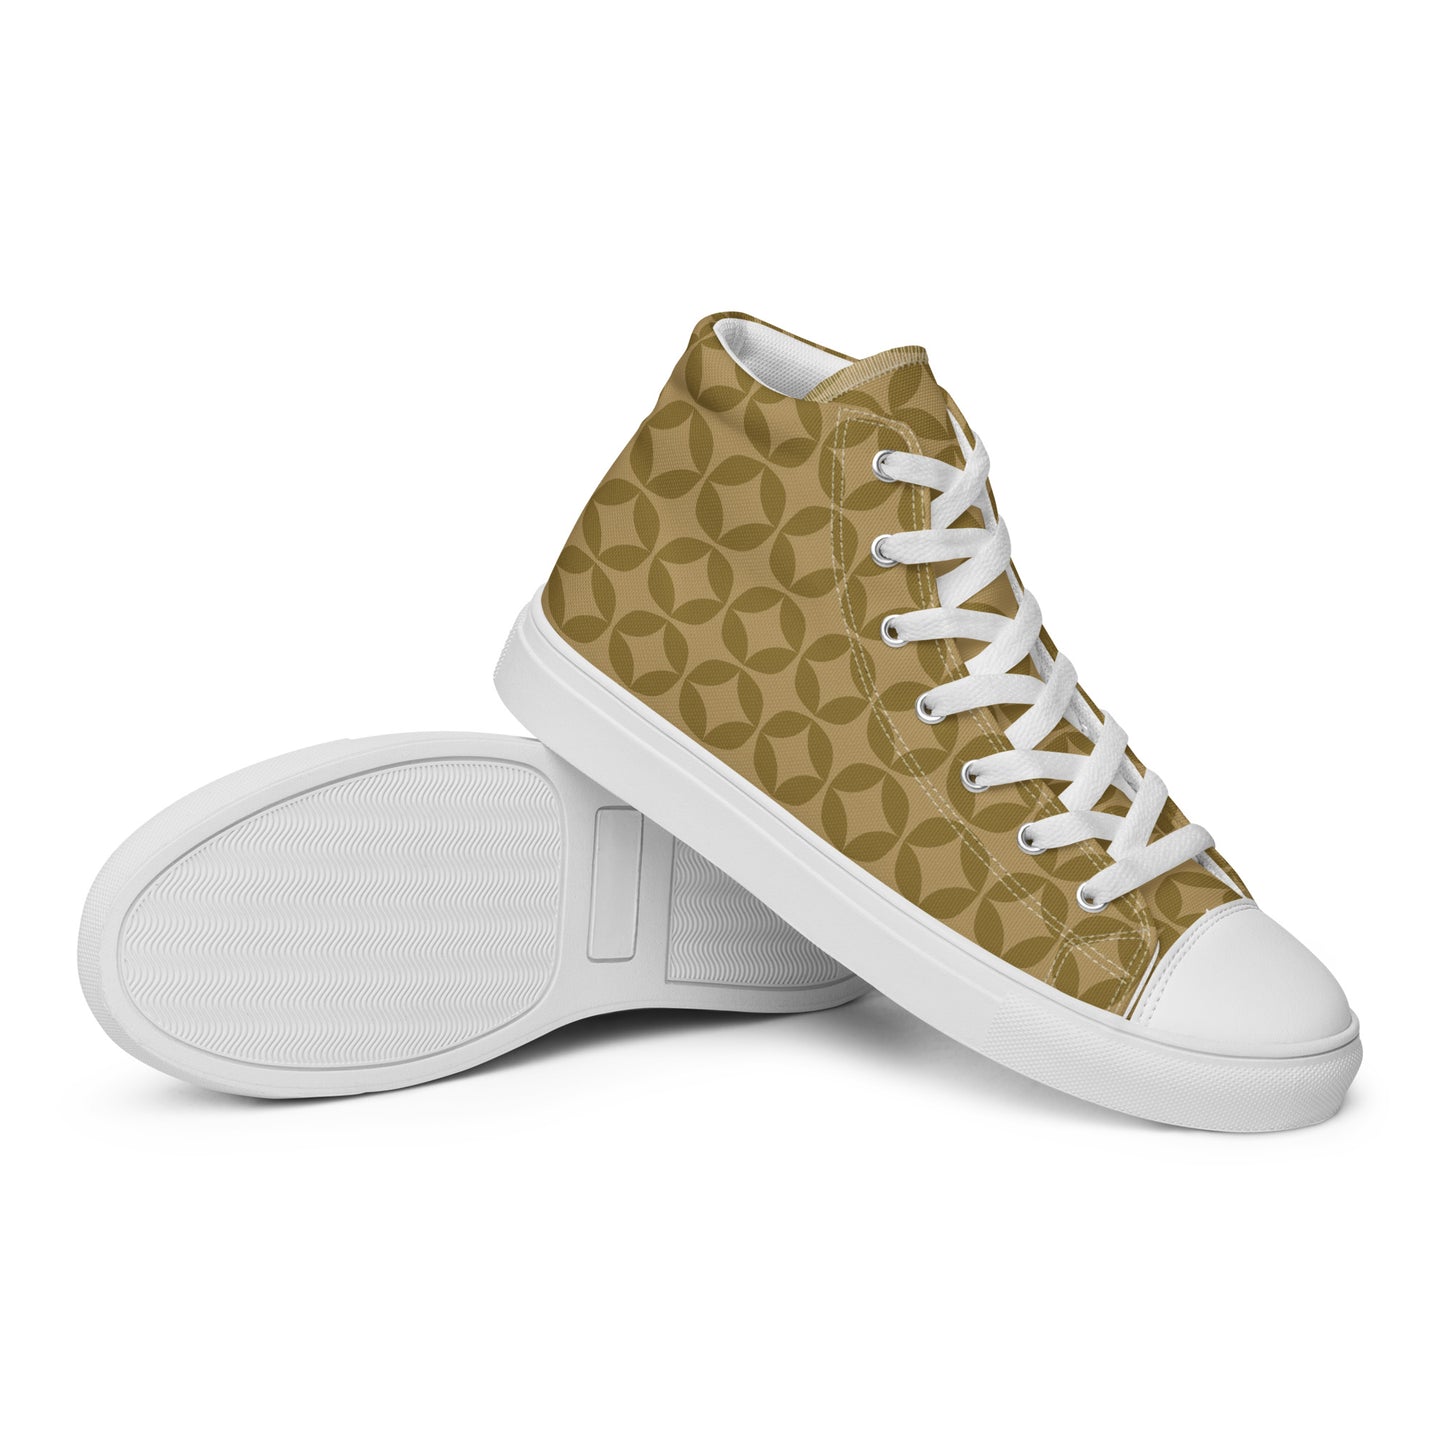 Wempy Dyocta Koto Signature Luxury - Sustainably Made Women’s high top canvas shoes